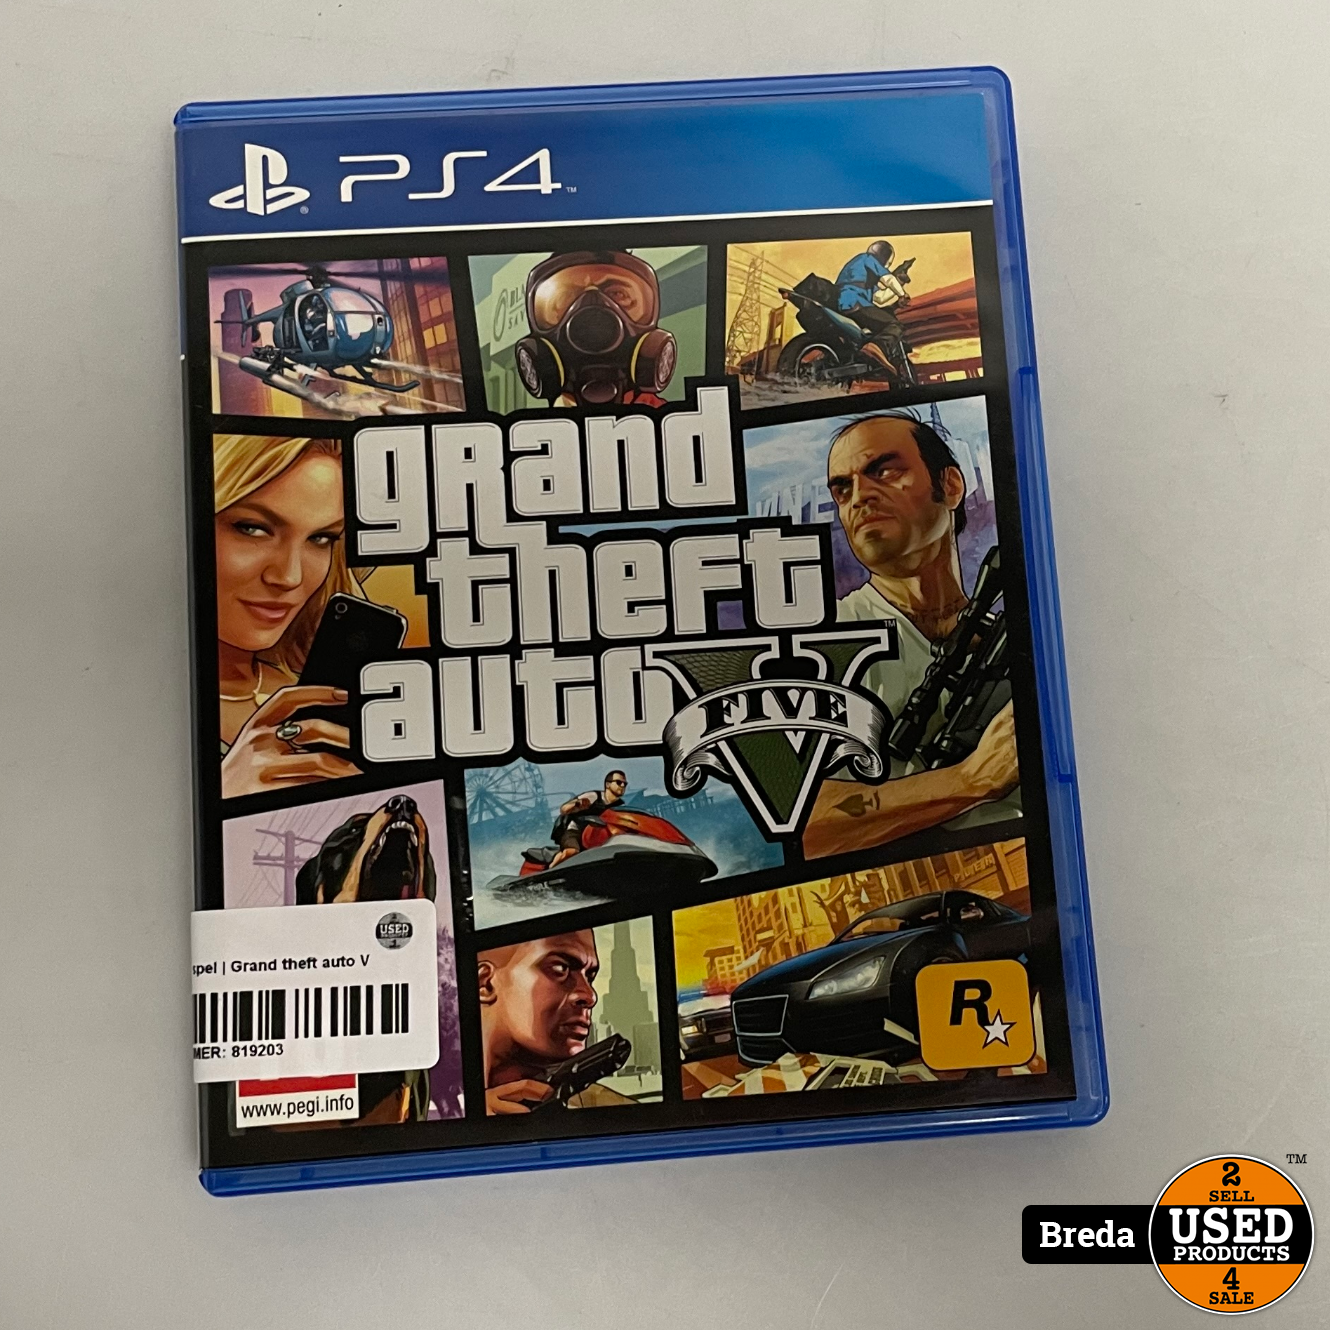 server Ontembare vier keer Playstation 4 spel | Grand theft auto V - Used Products Breda